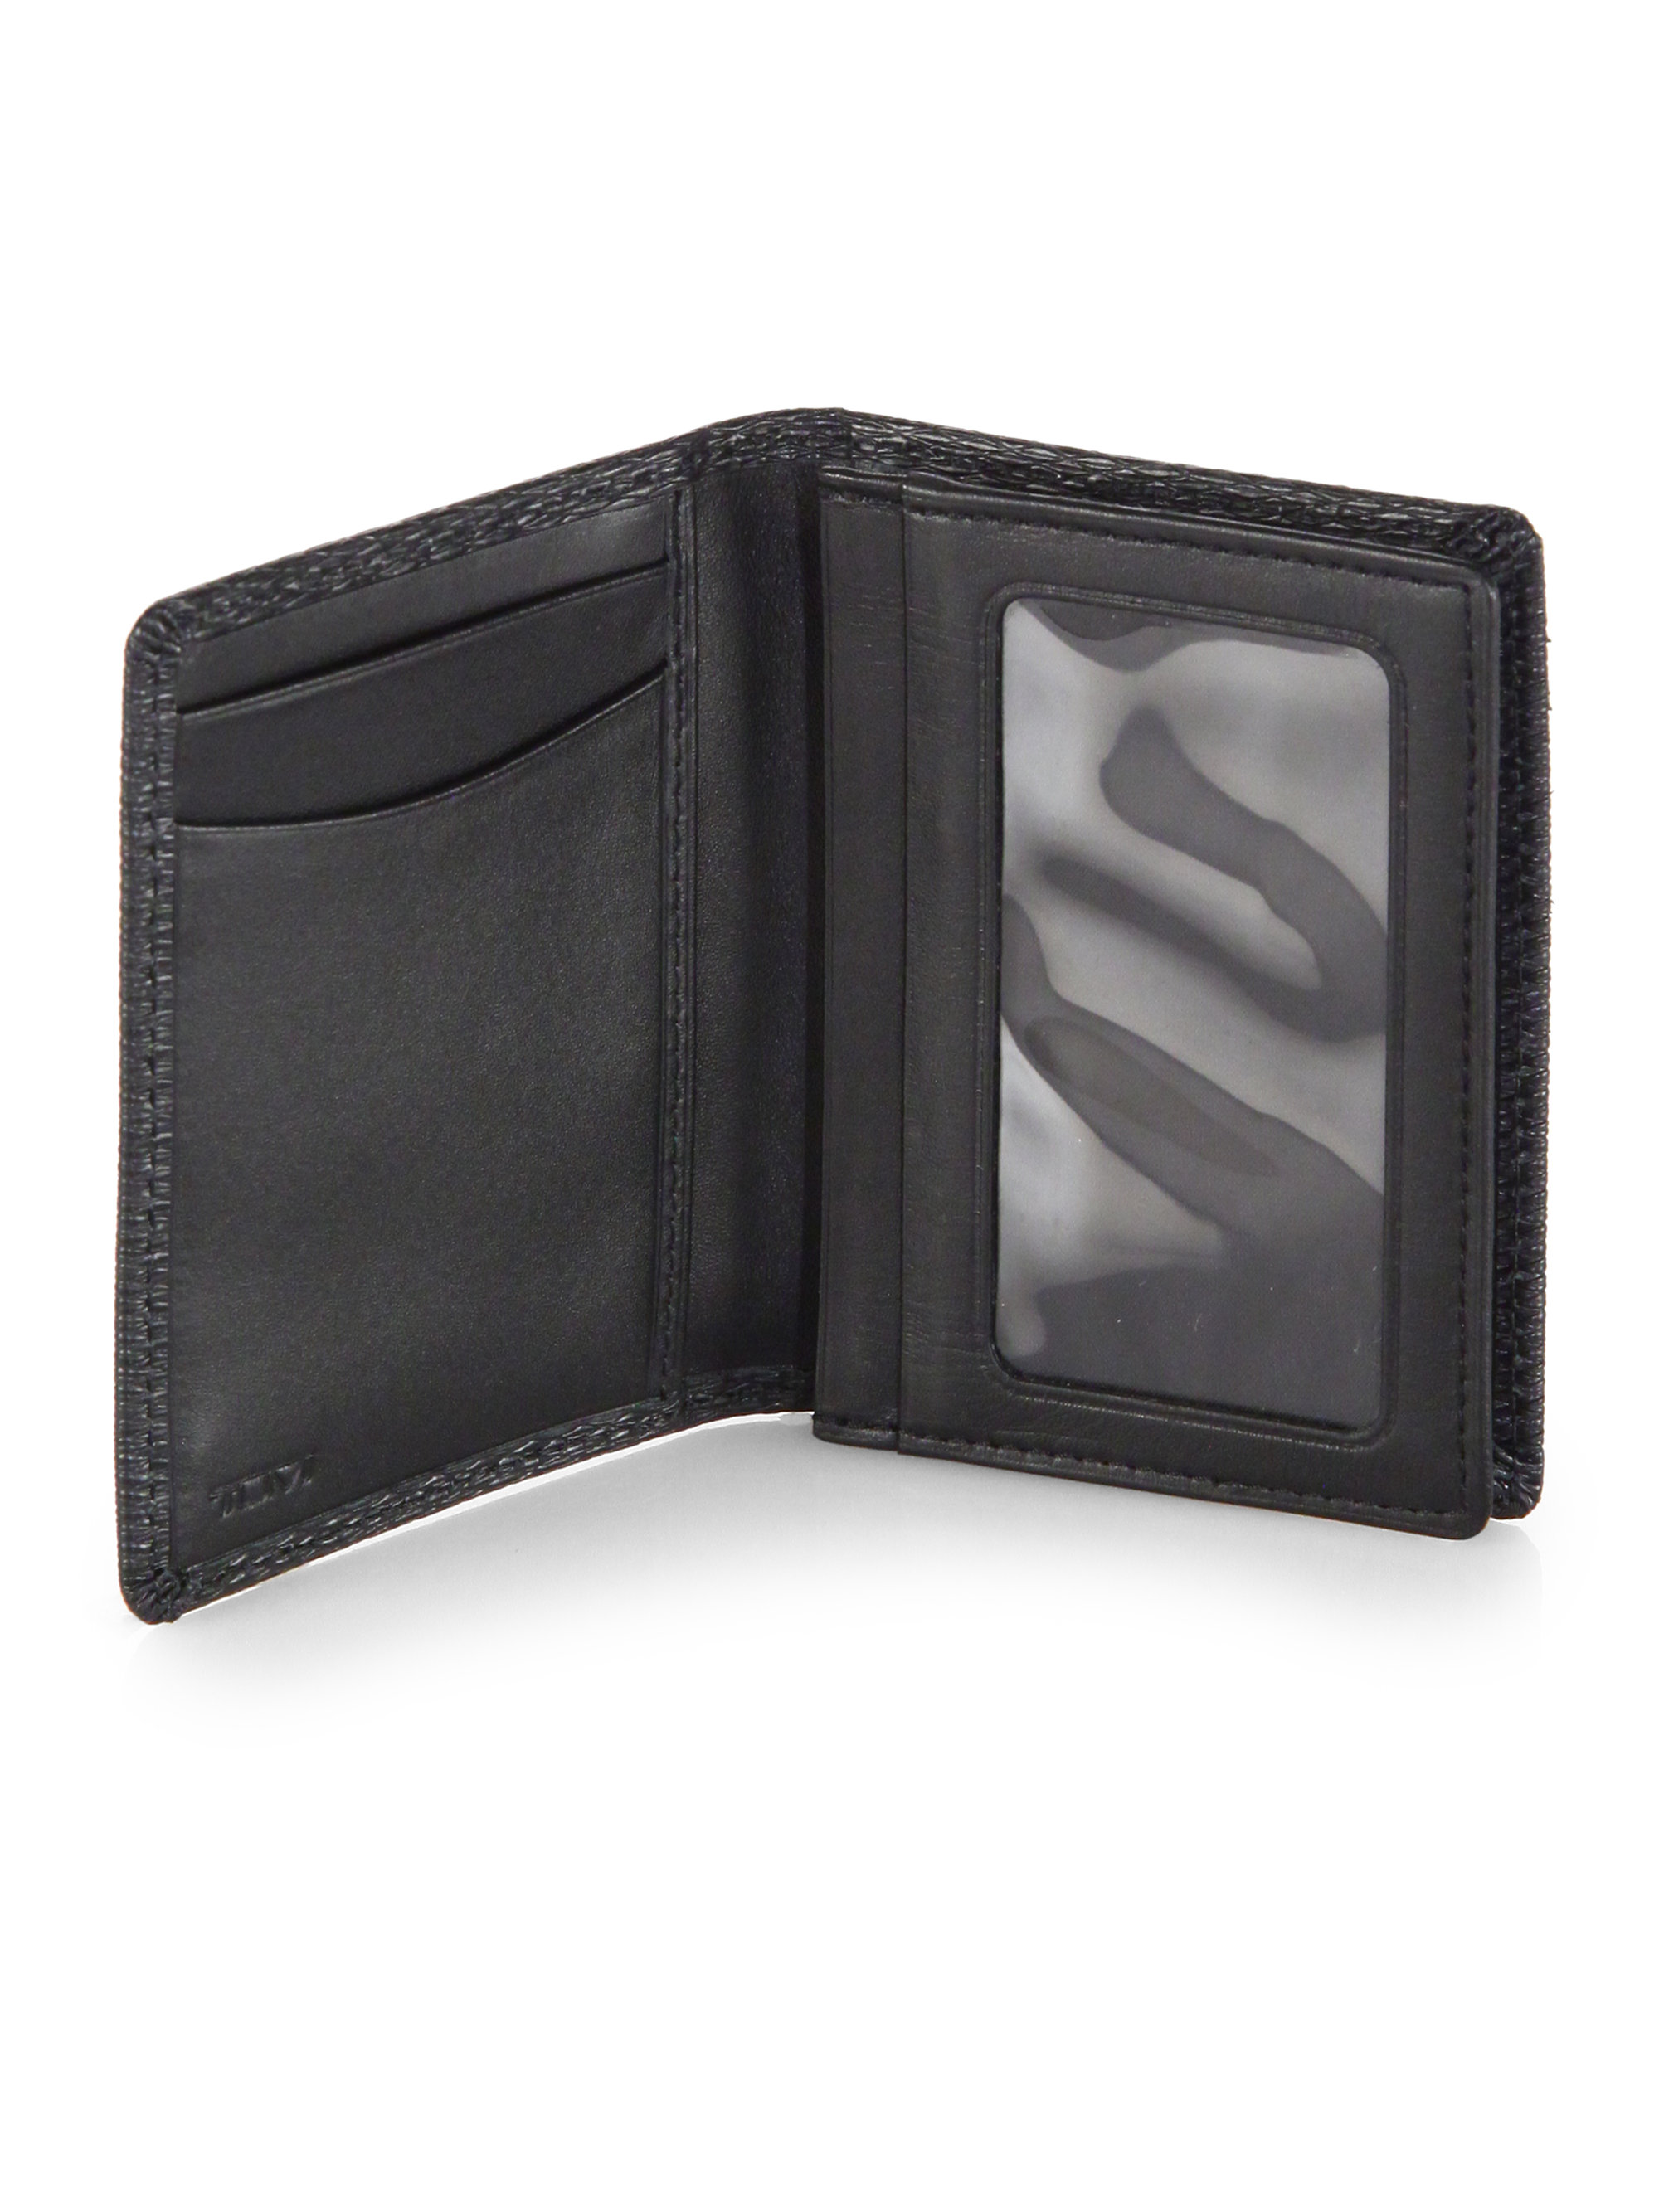 Lyst - Tumi Gusseted Card Case in Black for Men